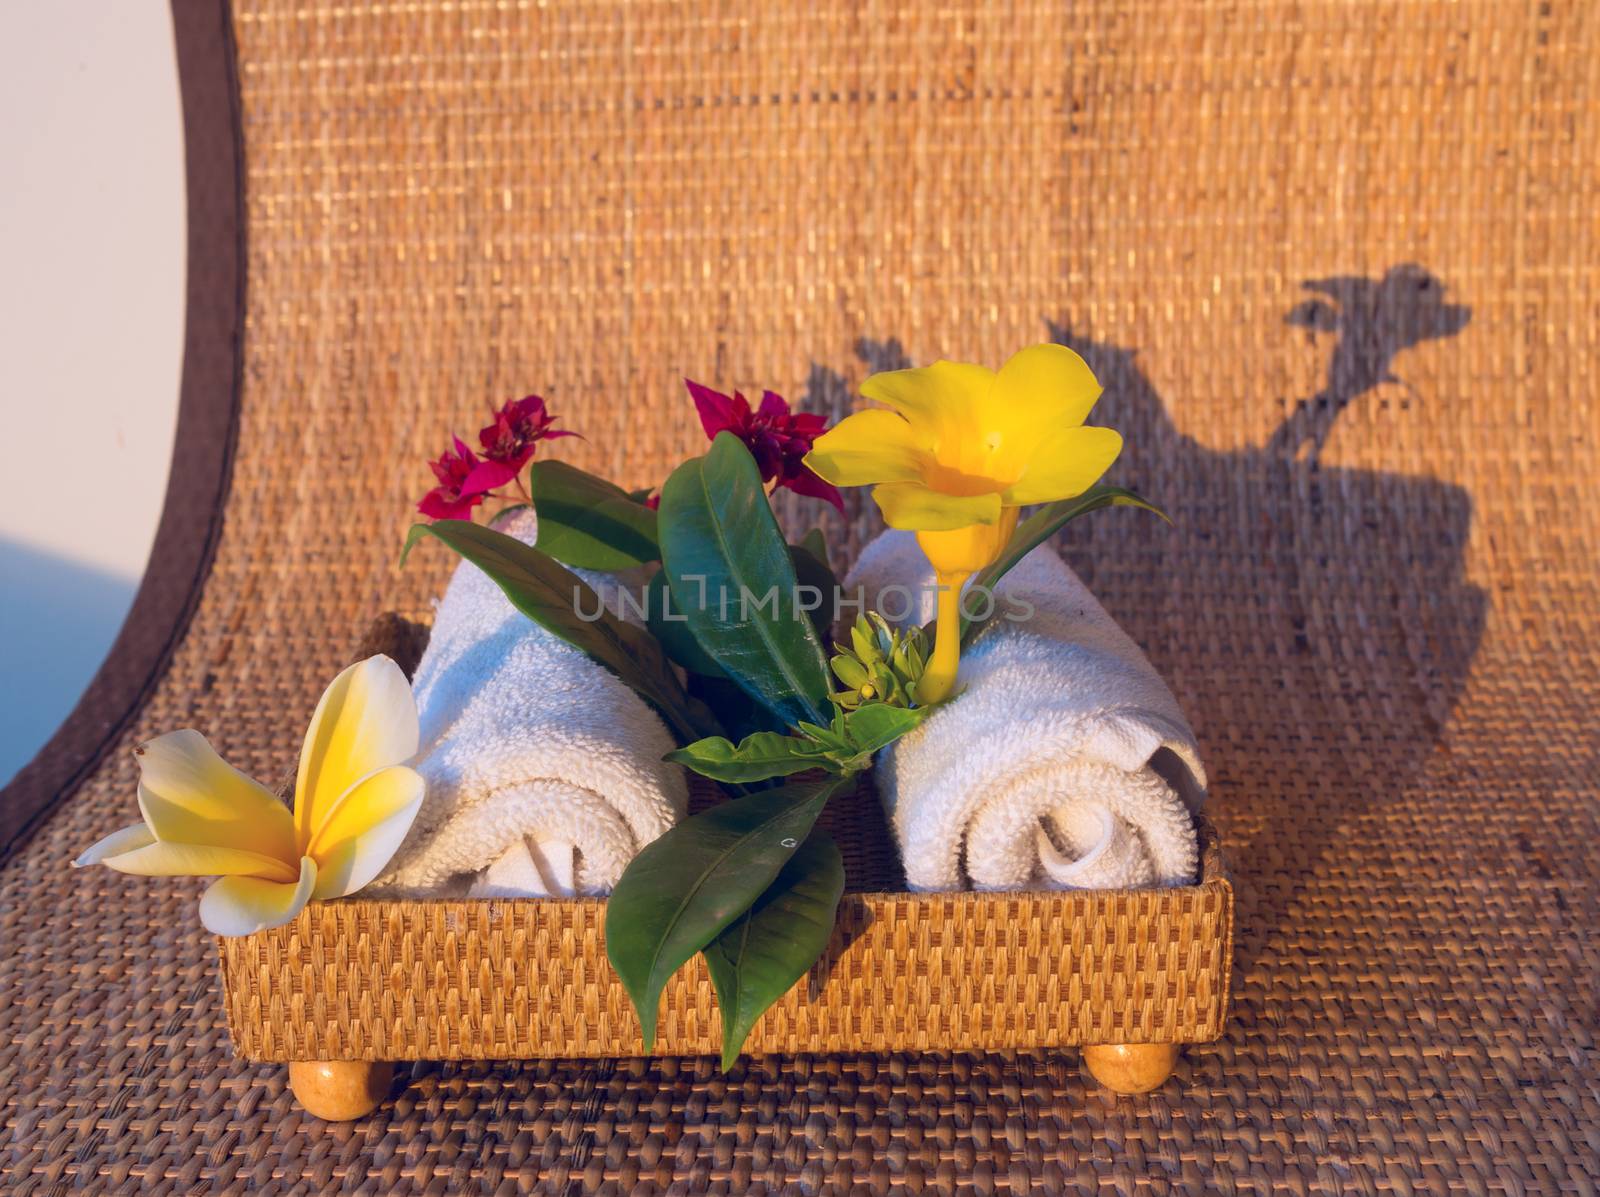 Two towels with red, yelow and white flowers